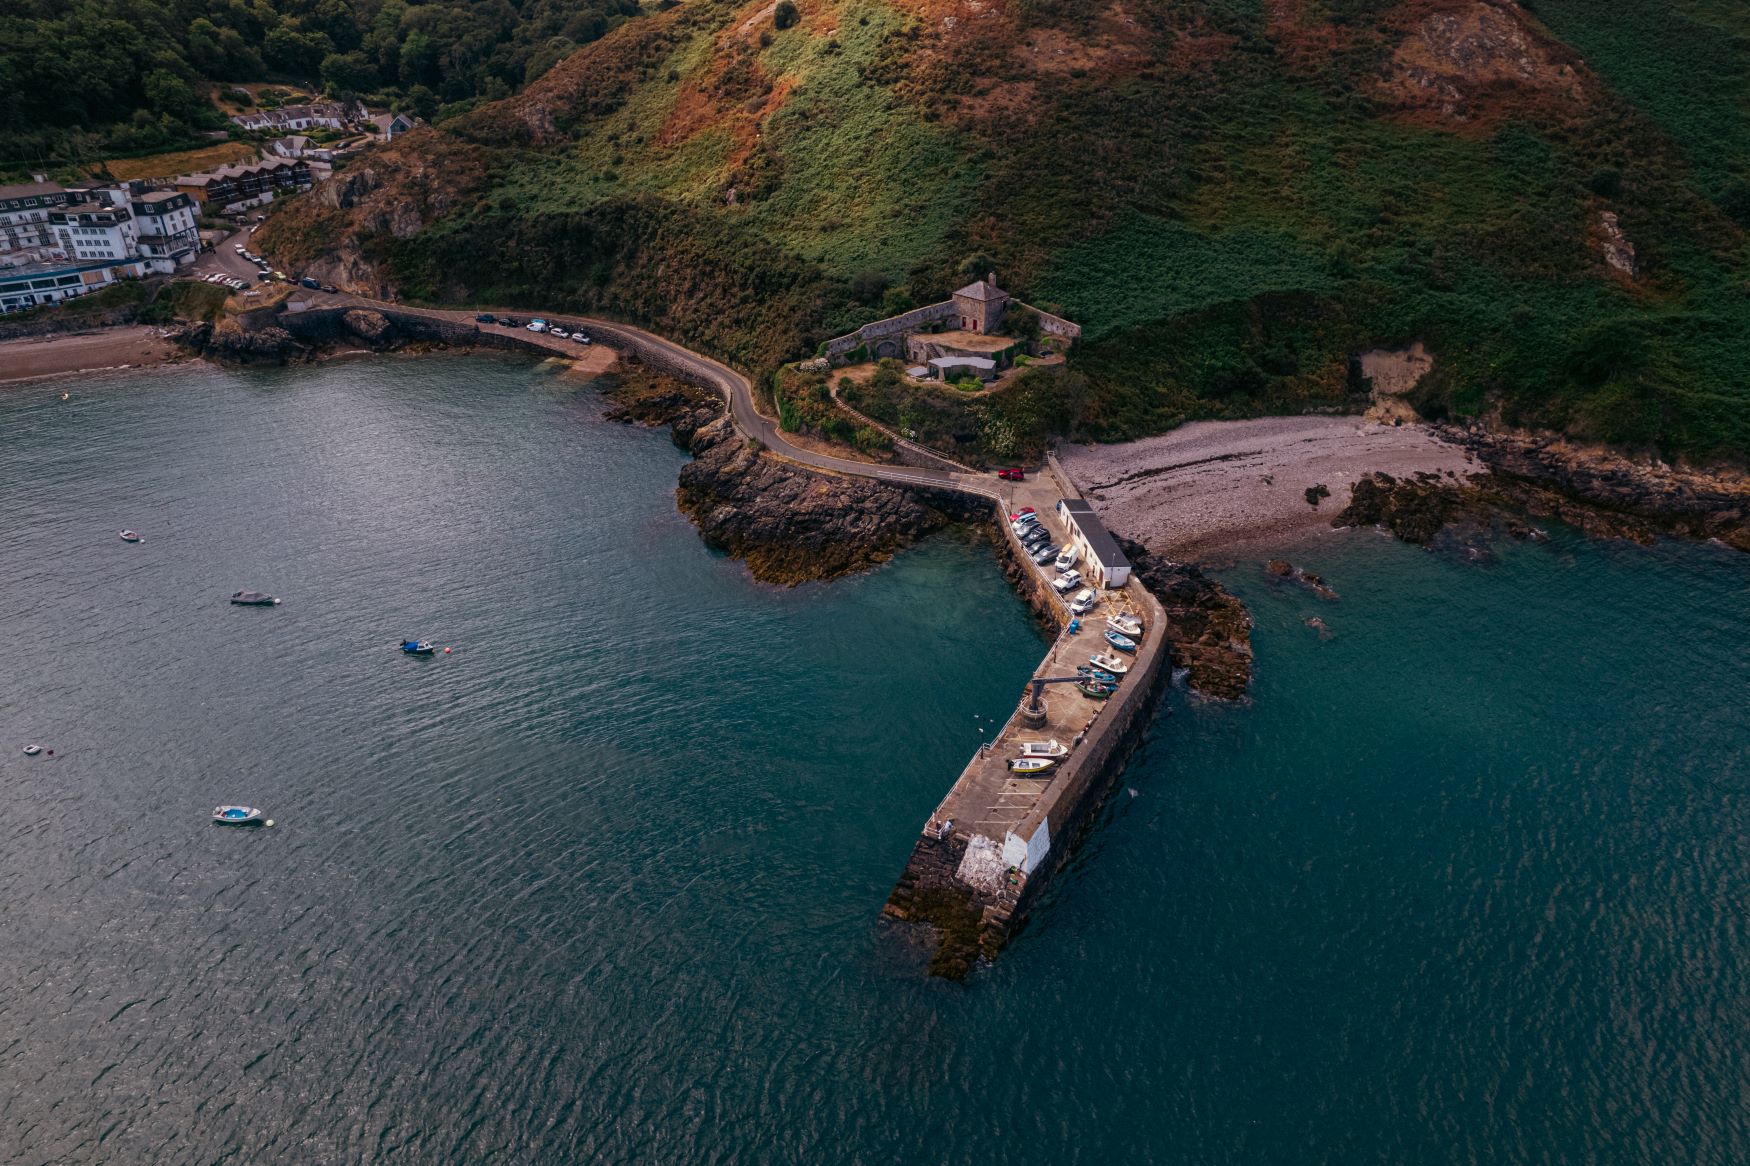 Location_of_one_of_the_trail_routes_at_Bouley_Bay_C._Matt_Jarvis_Media.jpg